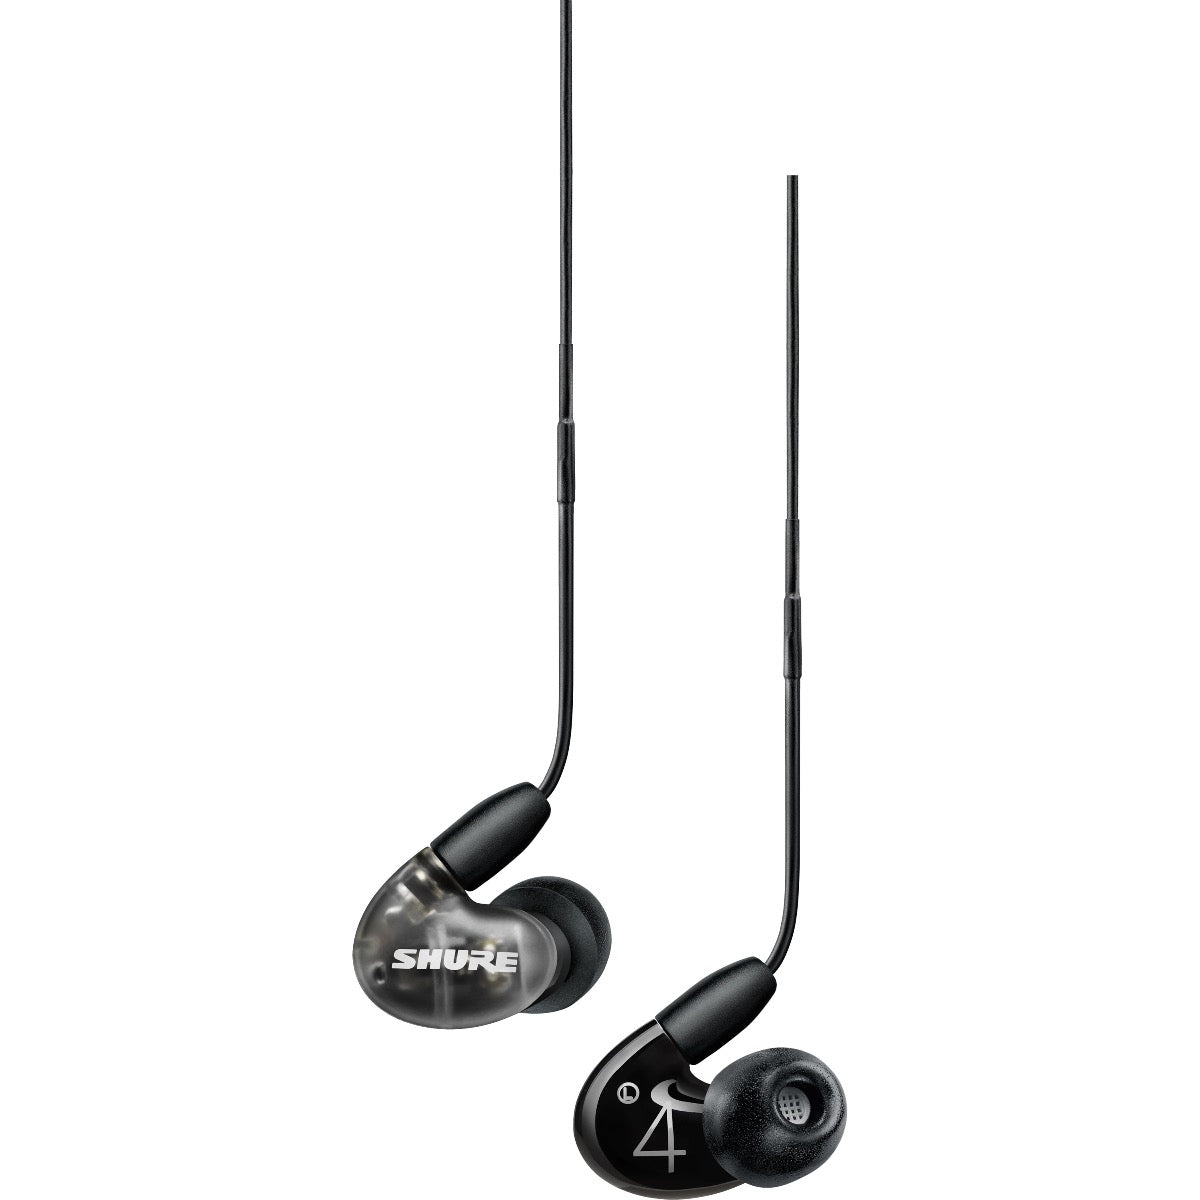 Close up view of Shure AONIC 4 Sound Isolating Earphones - Clear/Black earpieces showing both sides